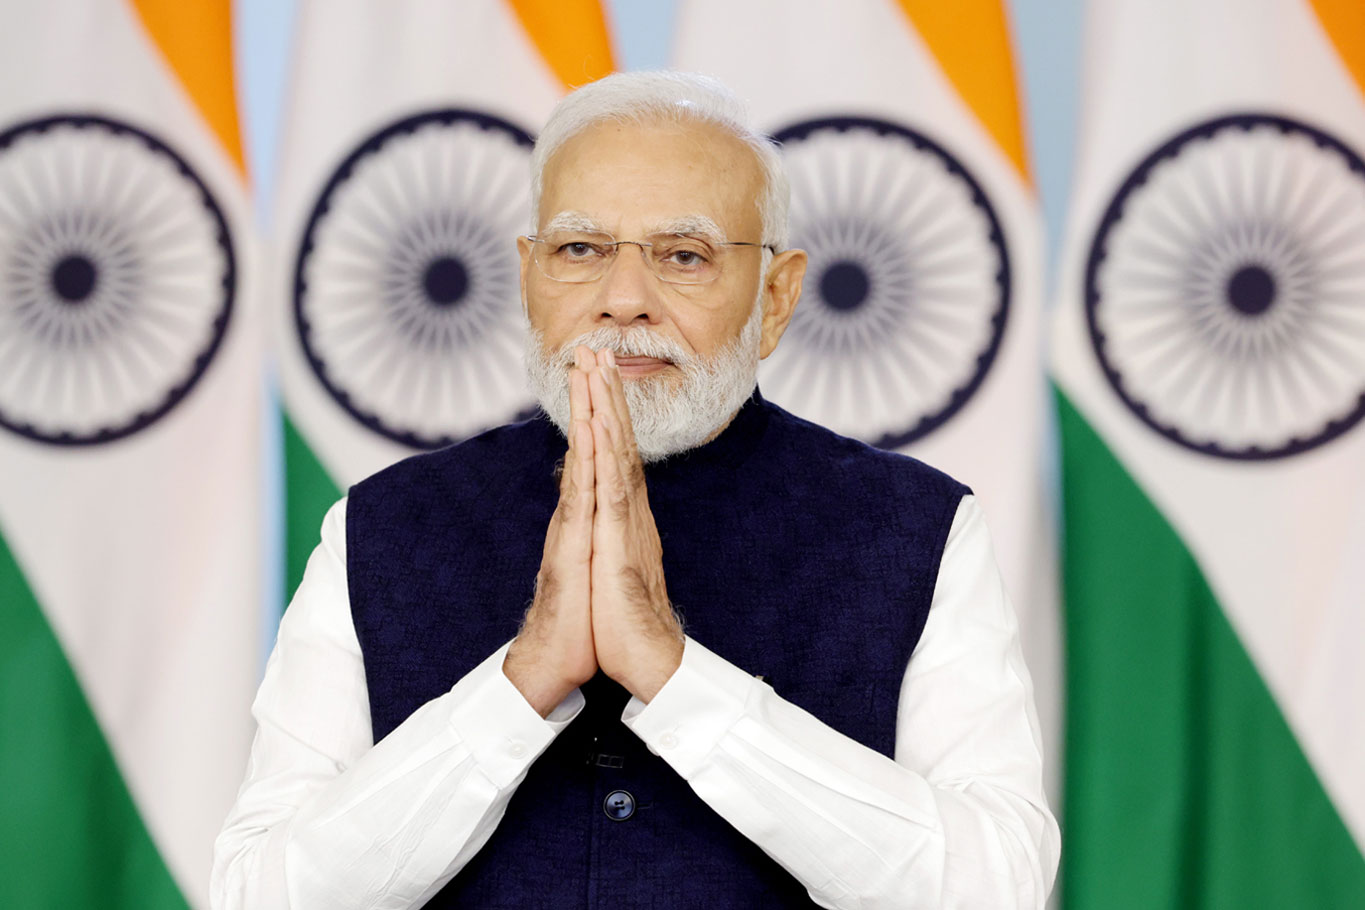 PM Modi to initiate projects worth $7.4 billion for 4 states, making a substantial push towards development.